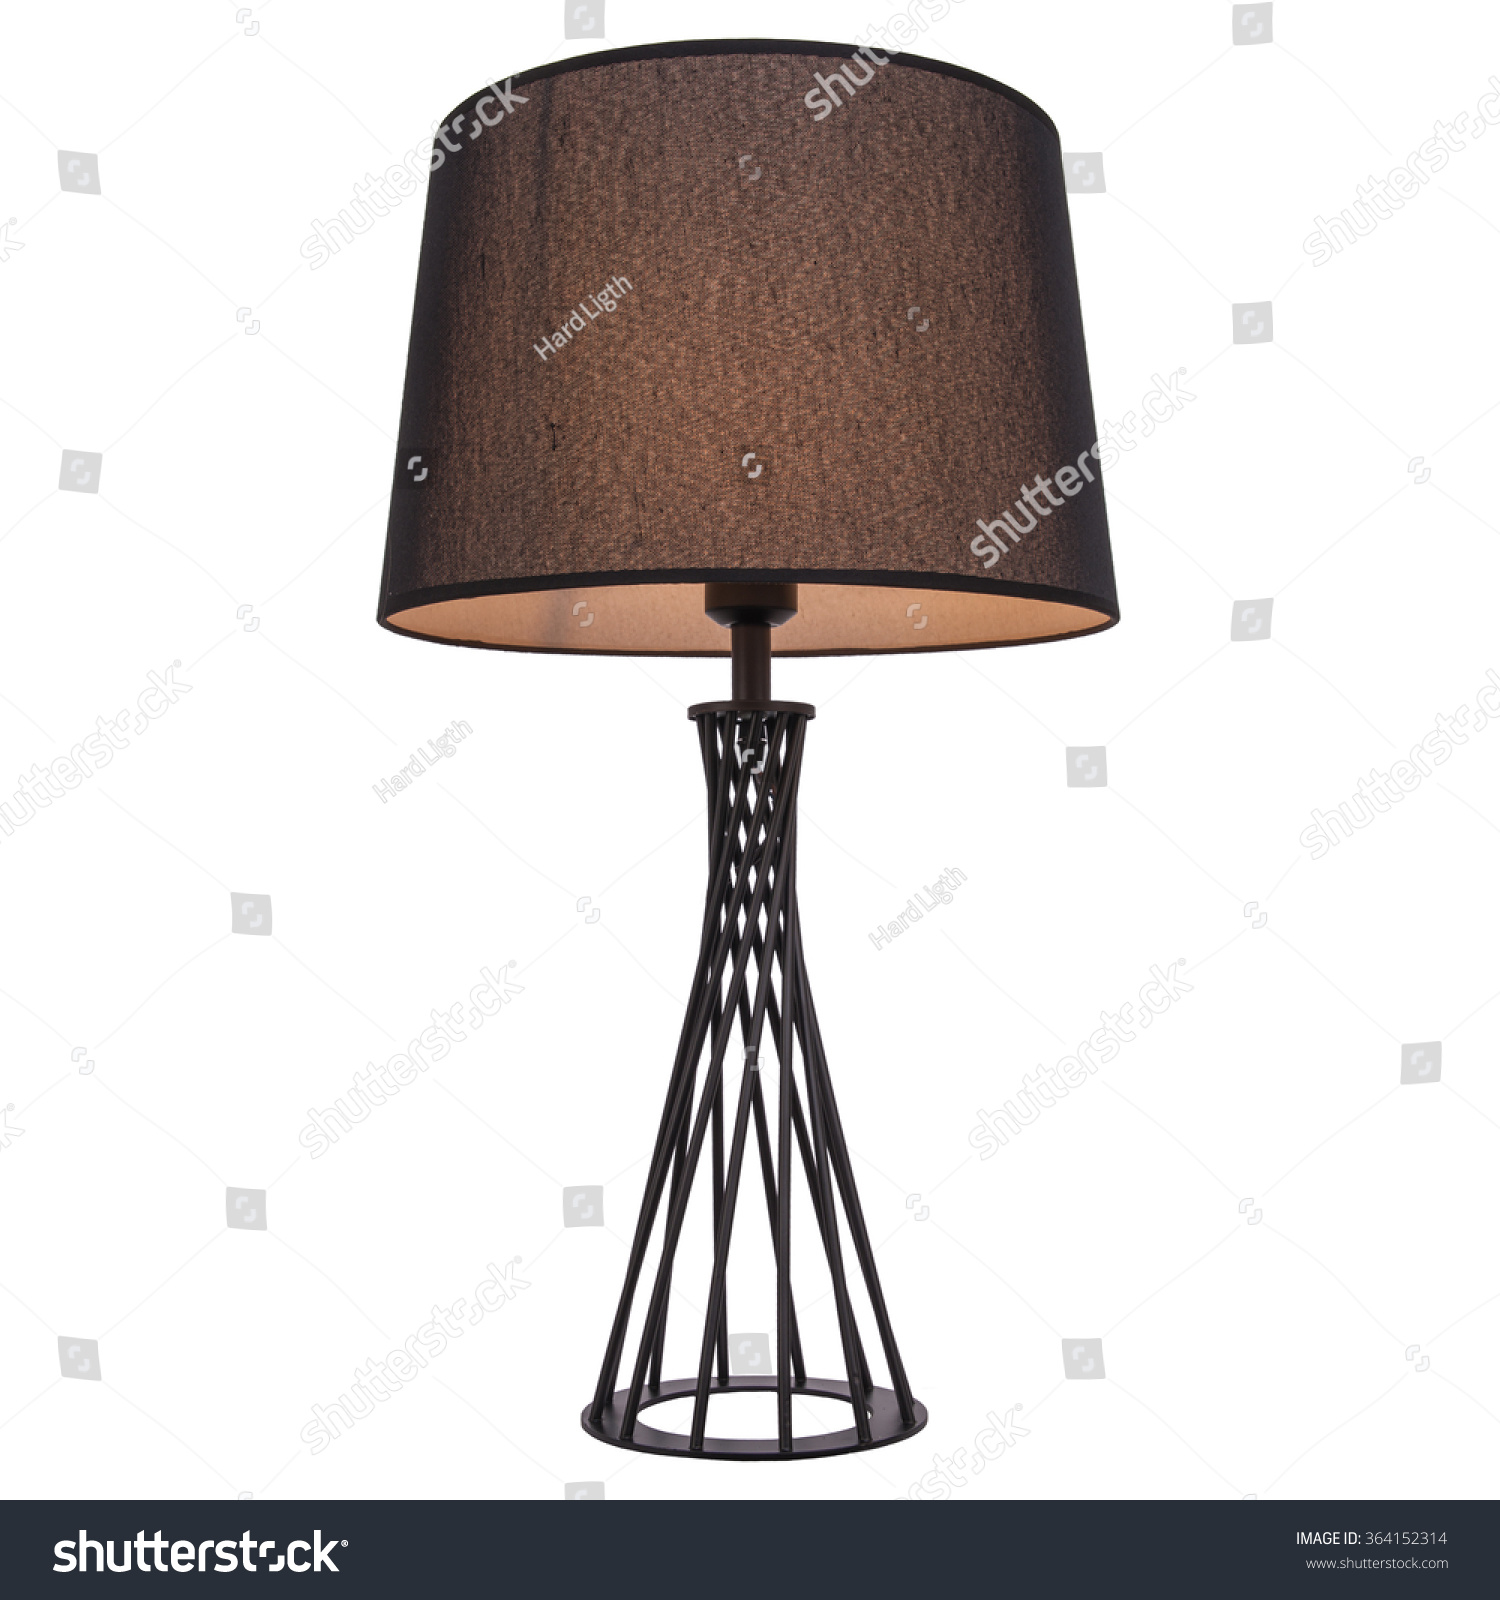 Table lamp isolated on white background #364152314